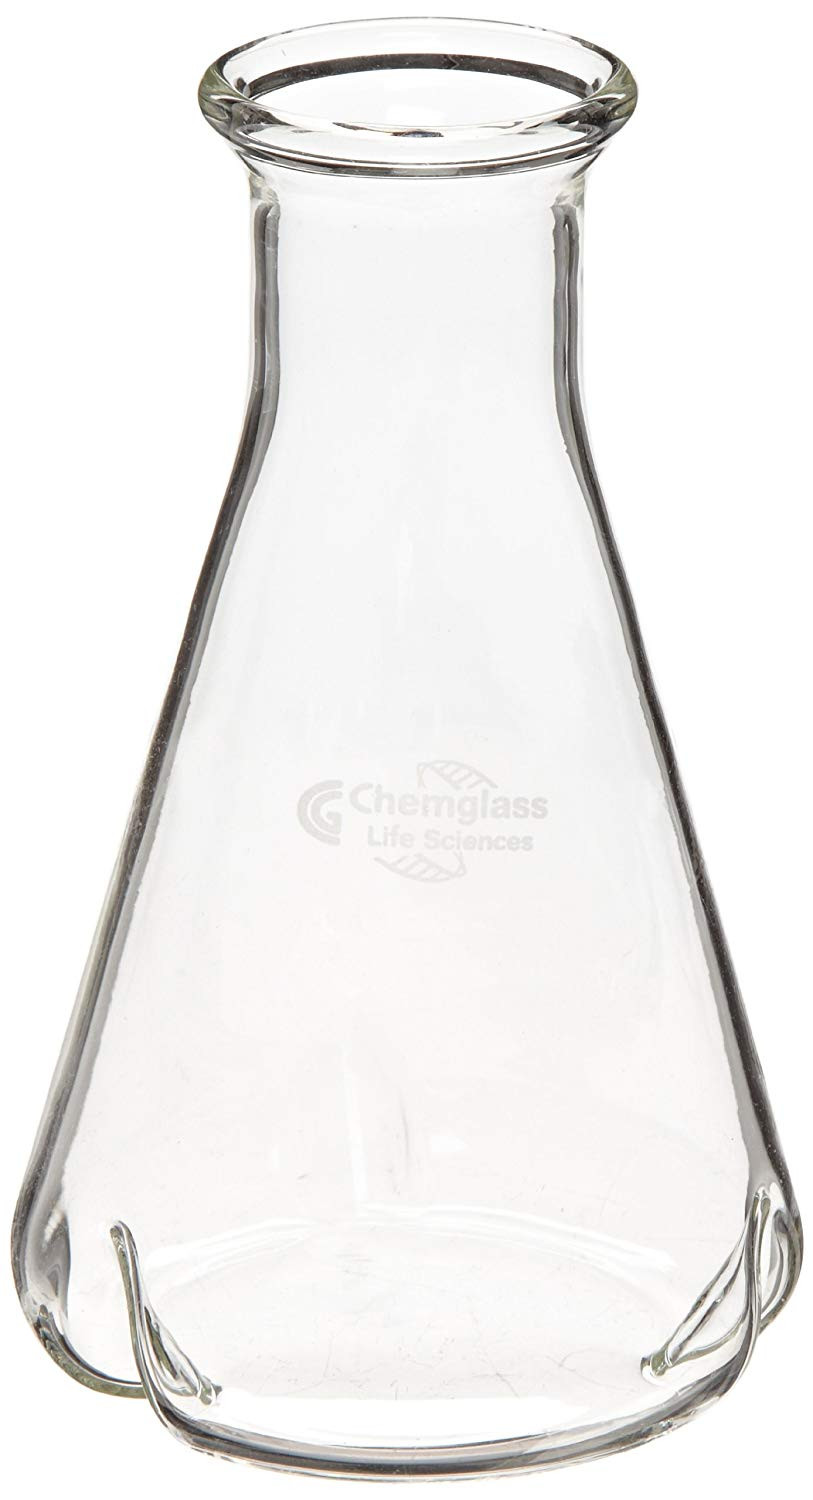 narrow neck glass vase of chemglass cls 2042 02 glass 250ml reinforced plain top shake flask with chemglass cls 2042 02 glass 250ml reinforced plain top shake flask with 3 deep baffles science lab boiling flasks amazon com industrial scientific